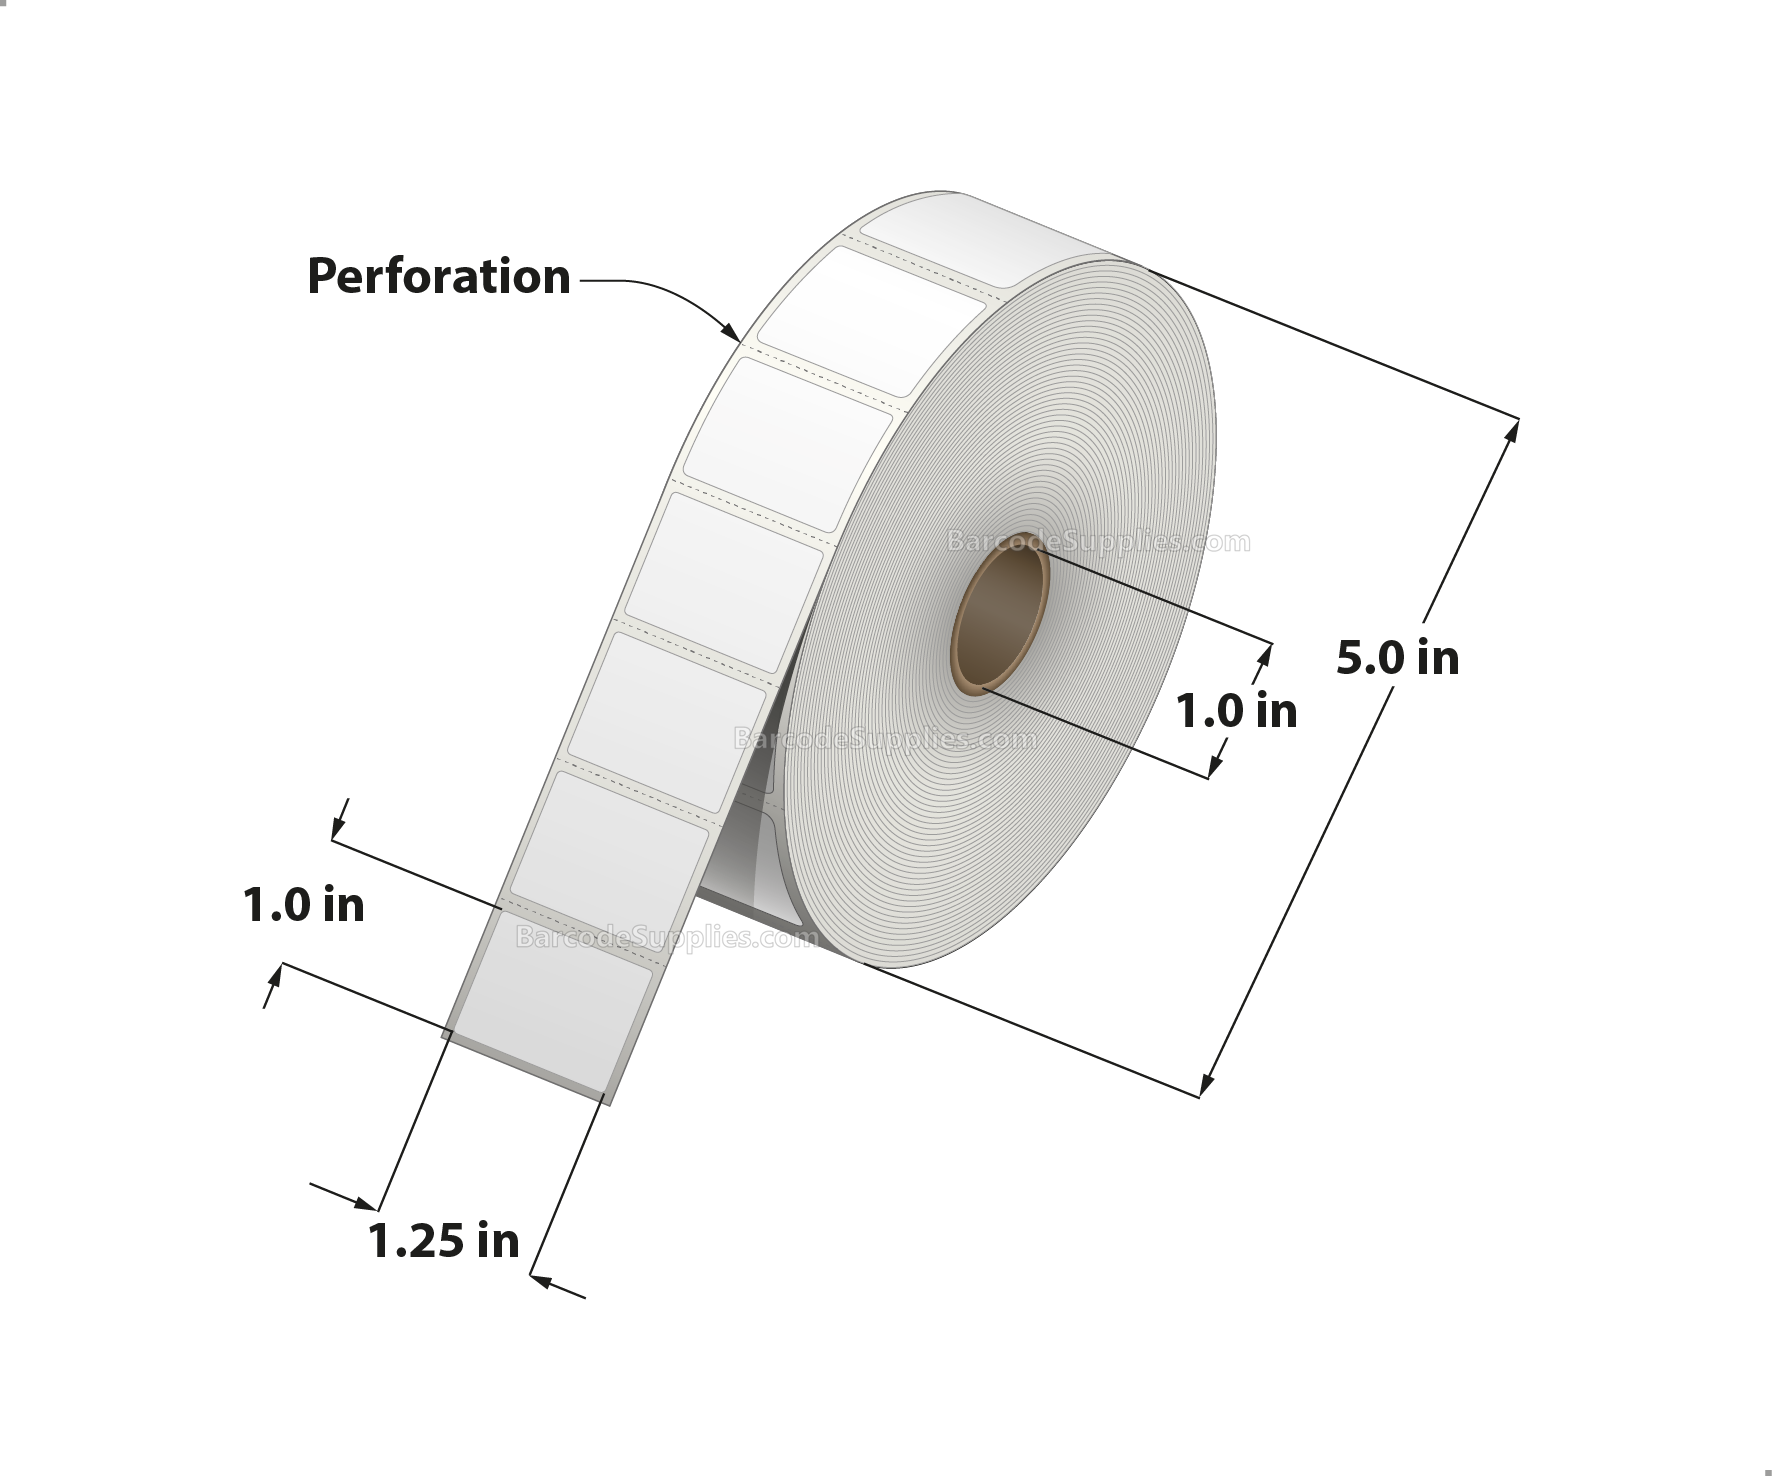 1.25 x 1 Direct Thermal White Labels With Permanent Acrylic Adhesive - Perforated - 2340 Labels Per Roll - Carton Of 4 Rolls - 9360 Labels Total - MPN: DT1251-15PDT